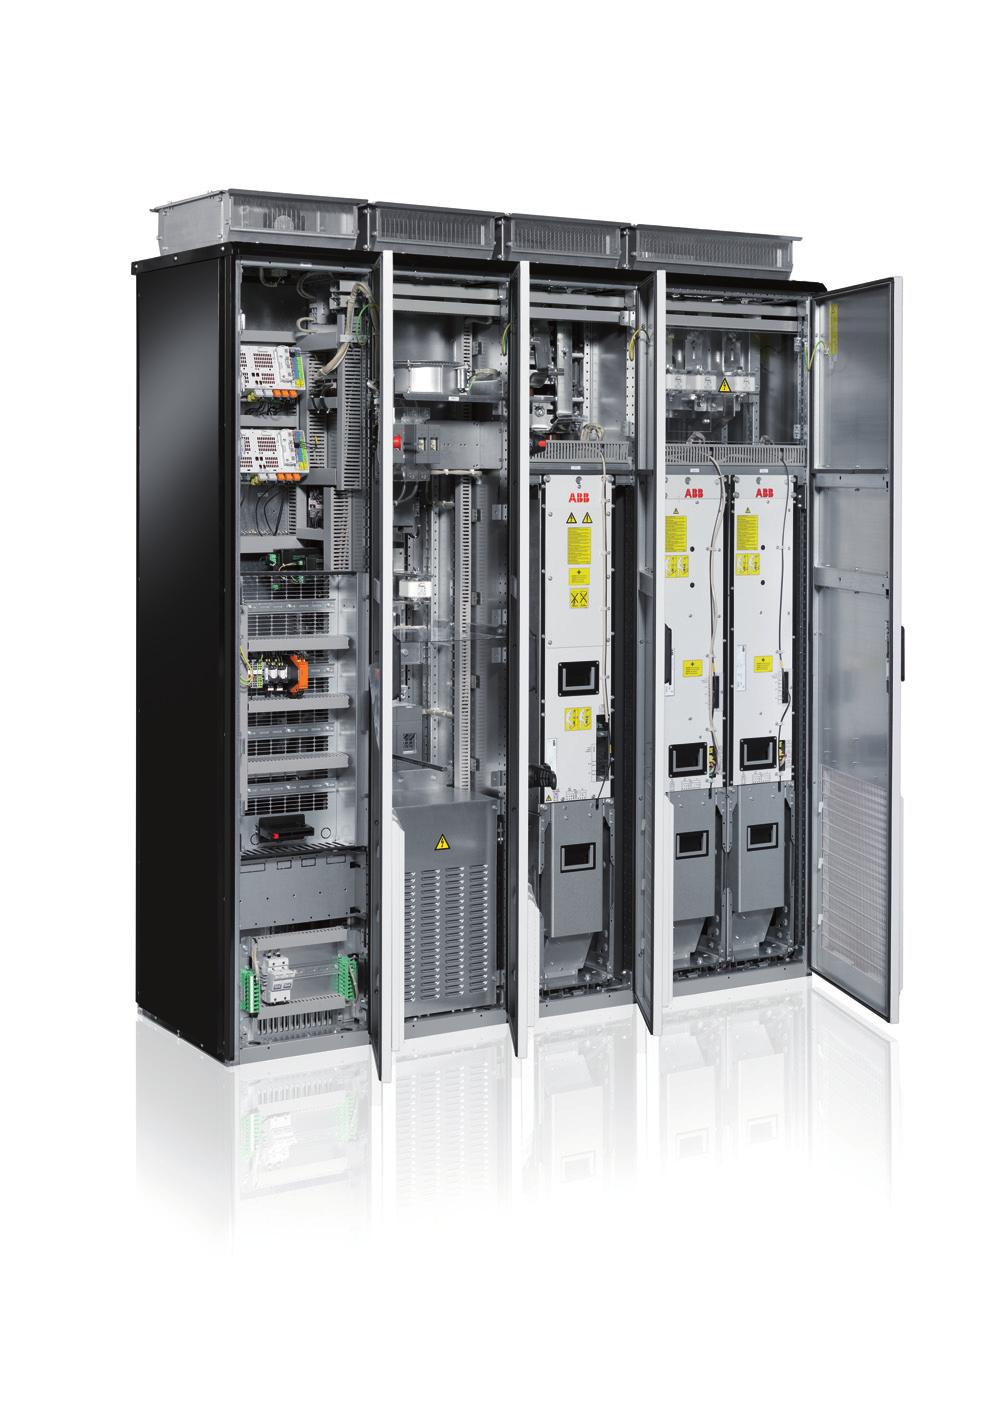 Cabinet-built single drives, ACS880-07 Our cabinet-built single drives are built to order, meeting customer needs despite any technical challenges.